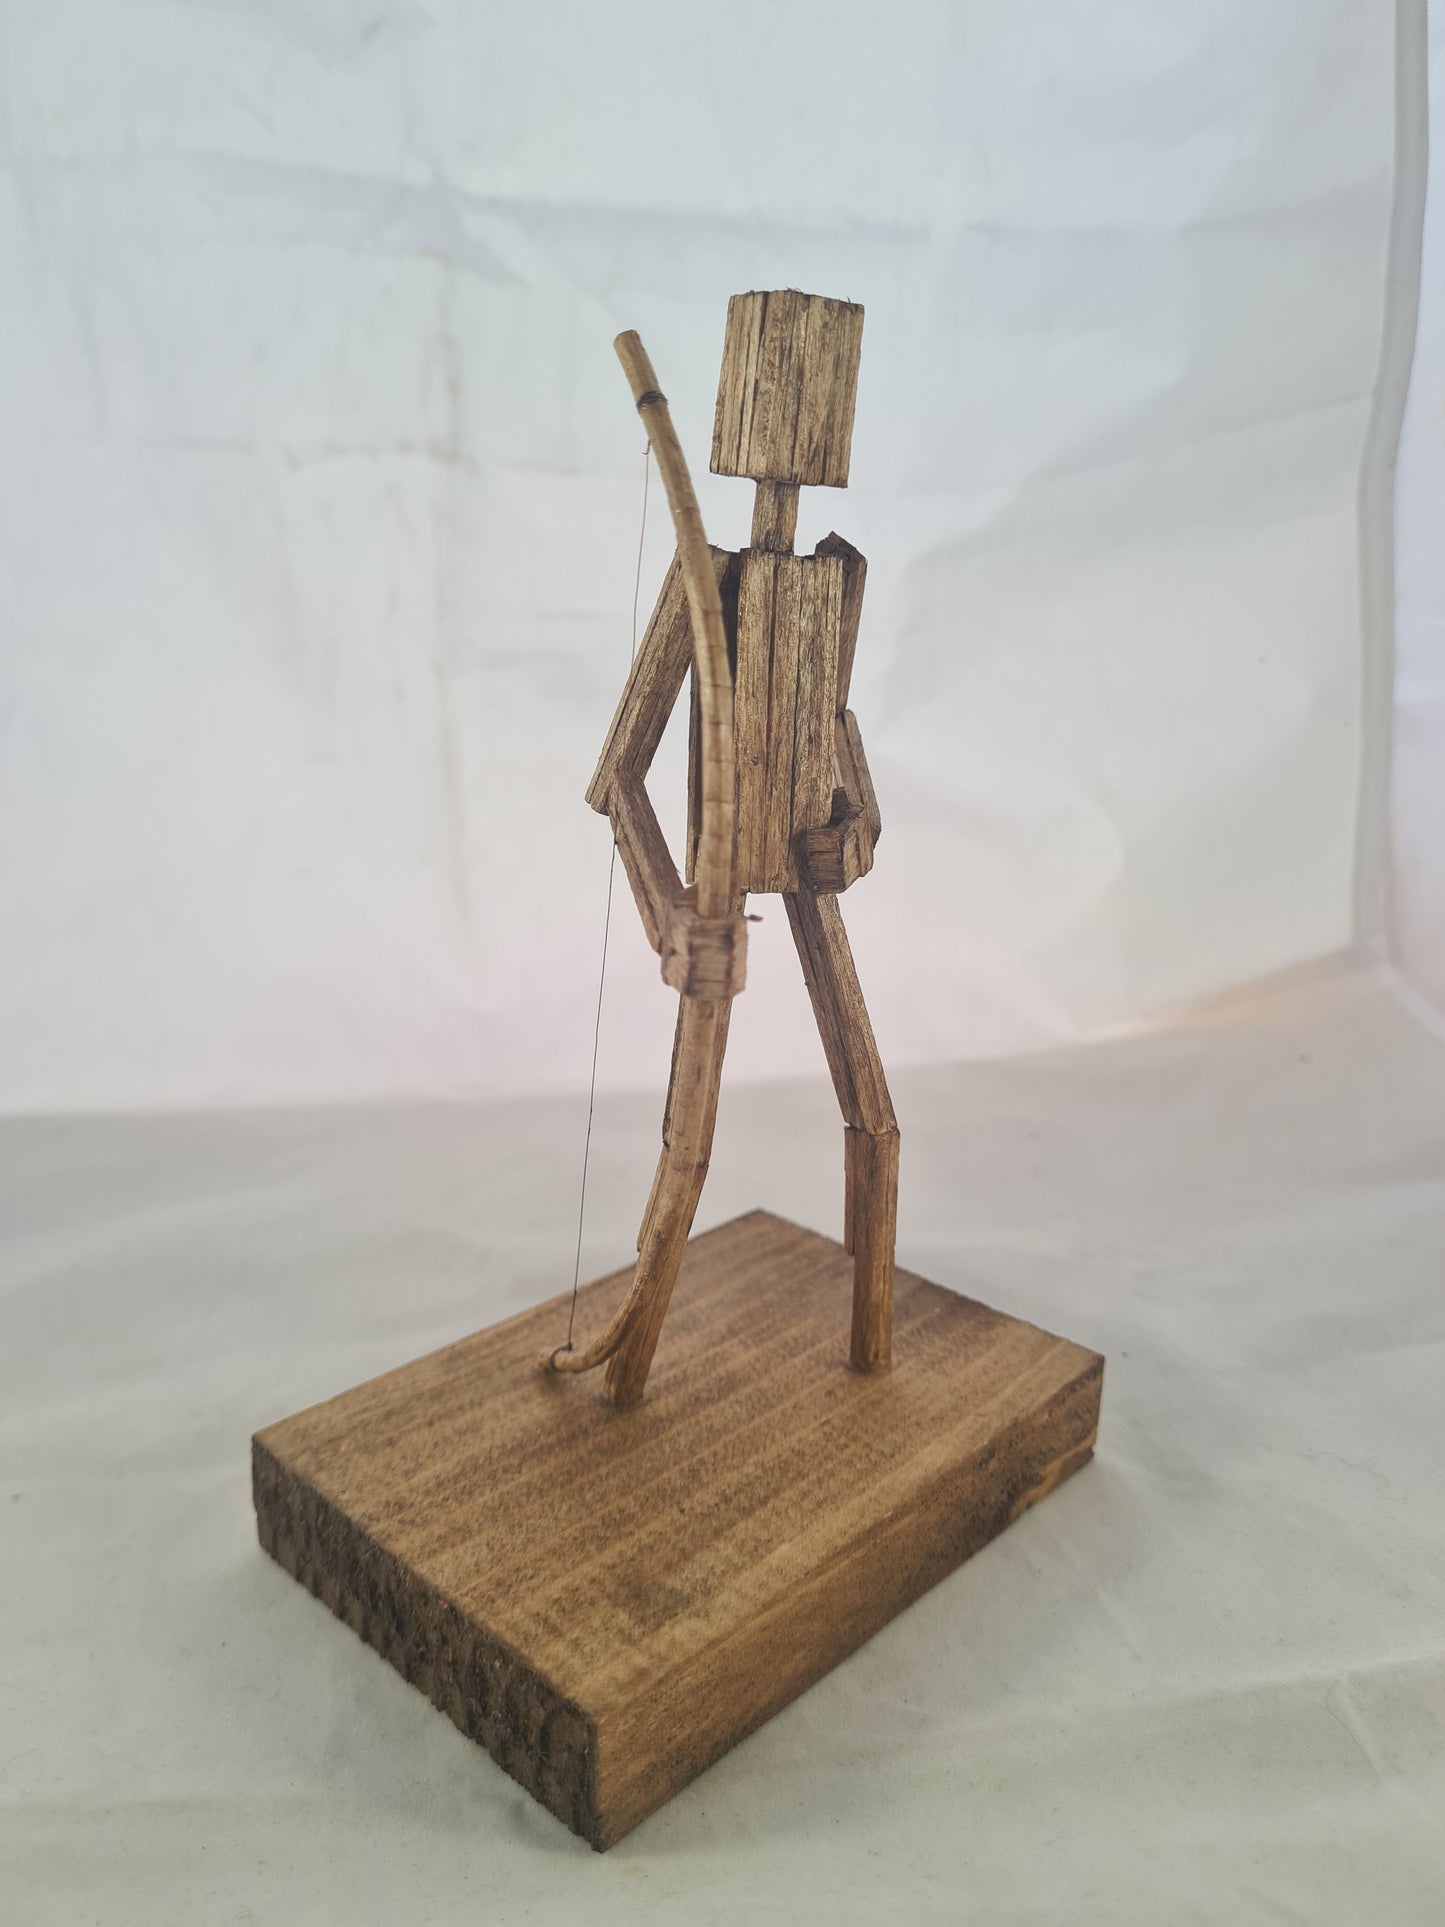 Archer  - Handcrafted Wooden Matchstick Figures - Gifts, Ornaments and Decor By Tiggidy Designs